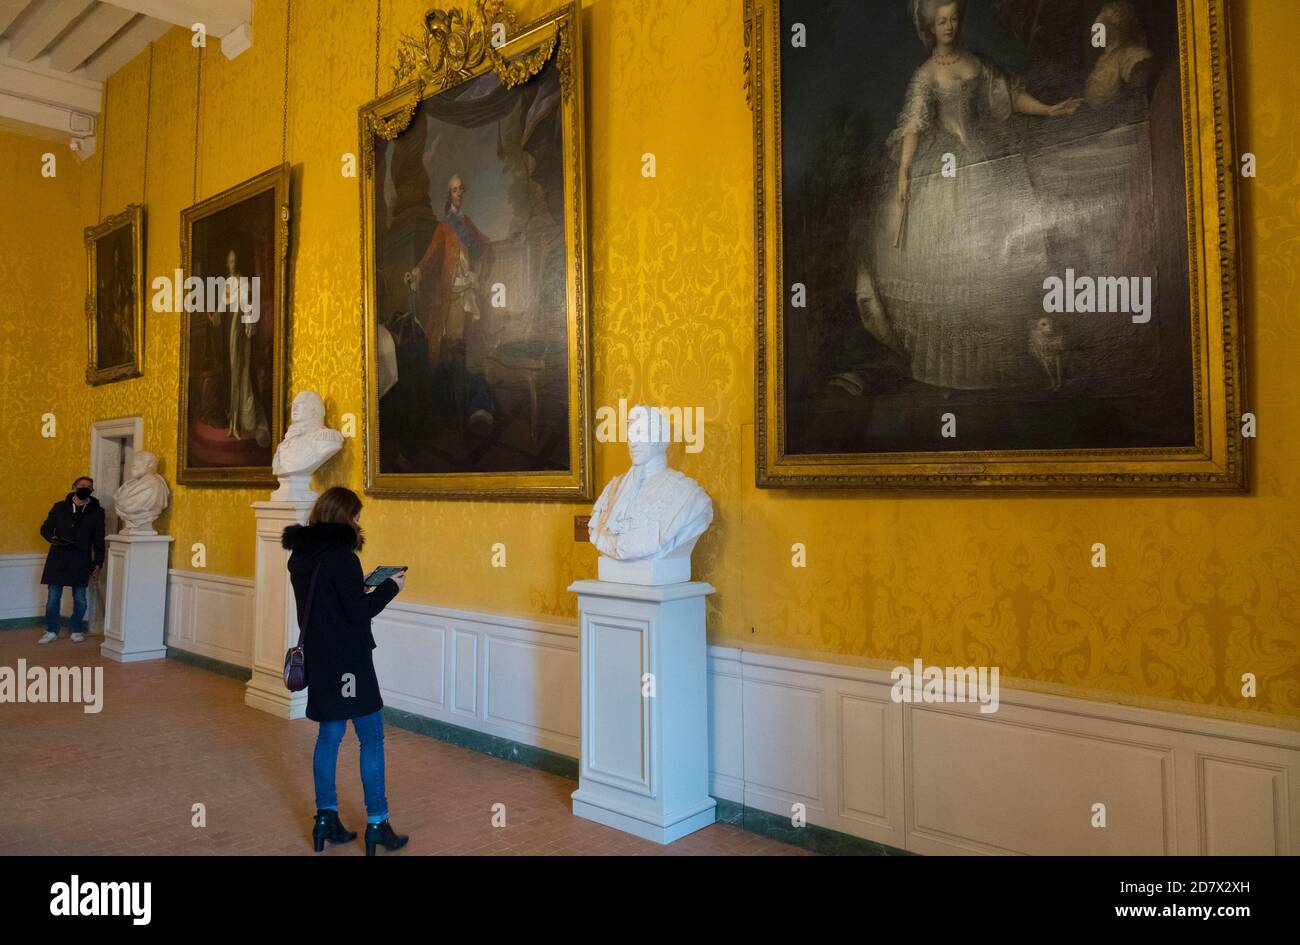 France, Loir-et-Cher (41), Chambord (UNESCO World Heritage), royal Renaissance castle, Bourbons room lined with yellow and gold fabrics, adorned with Stock Photo